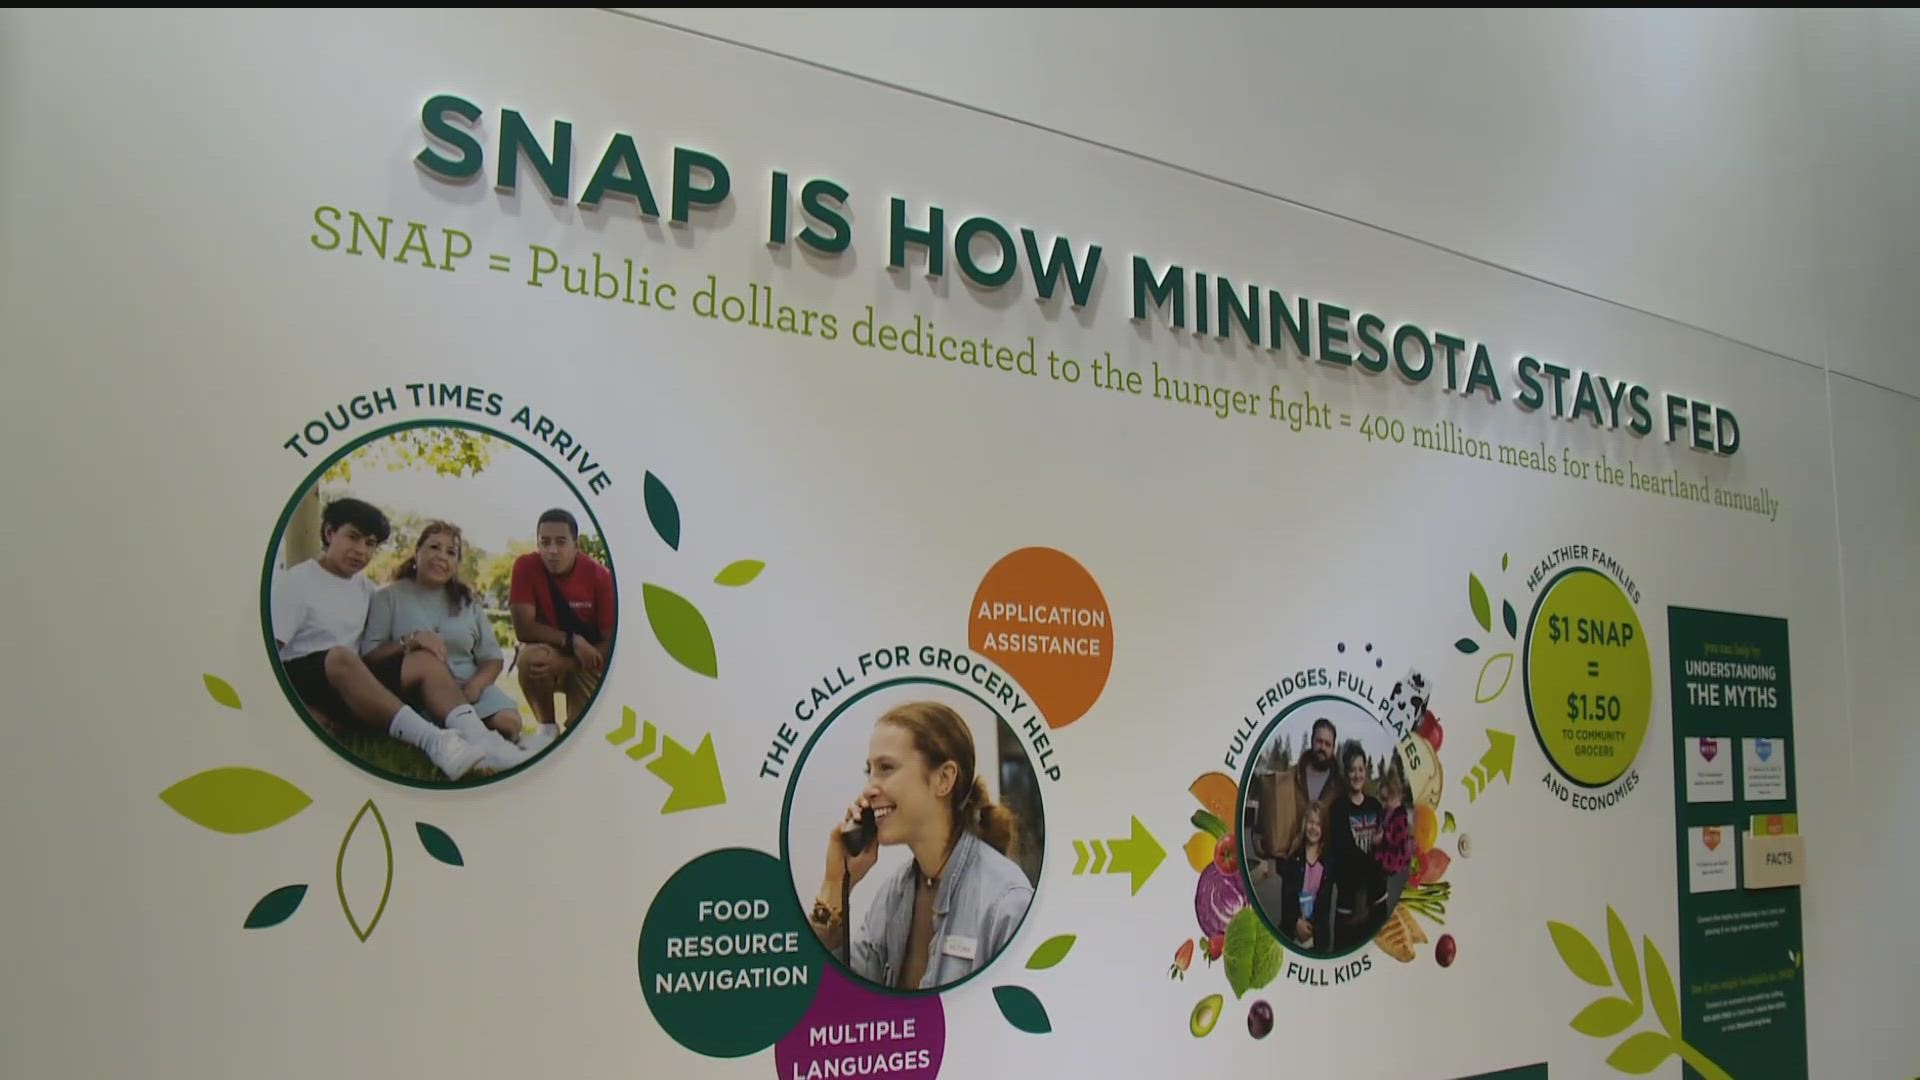 Food shelf visits already rose by 2 million last year in Minnesota compared to 2021, according to Hunger Solutions.